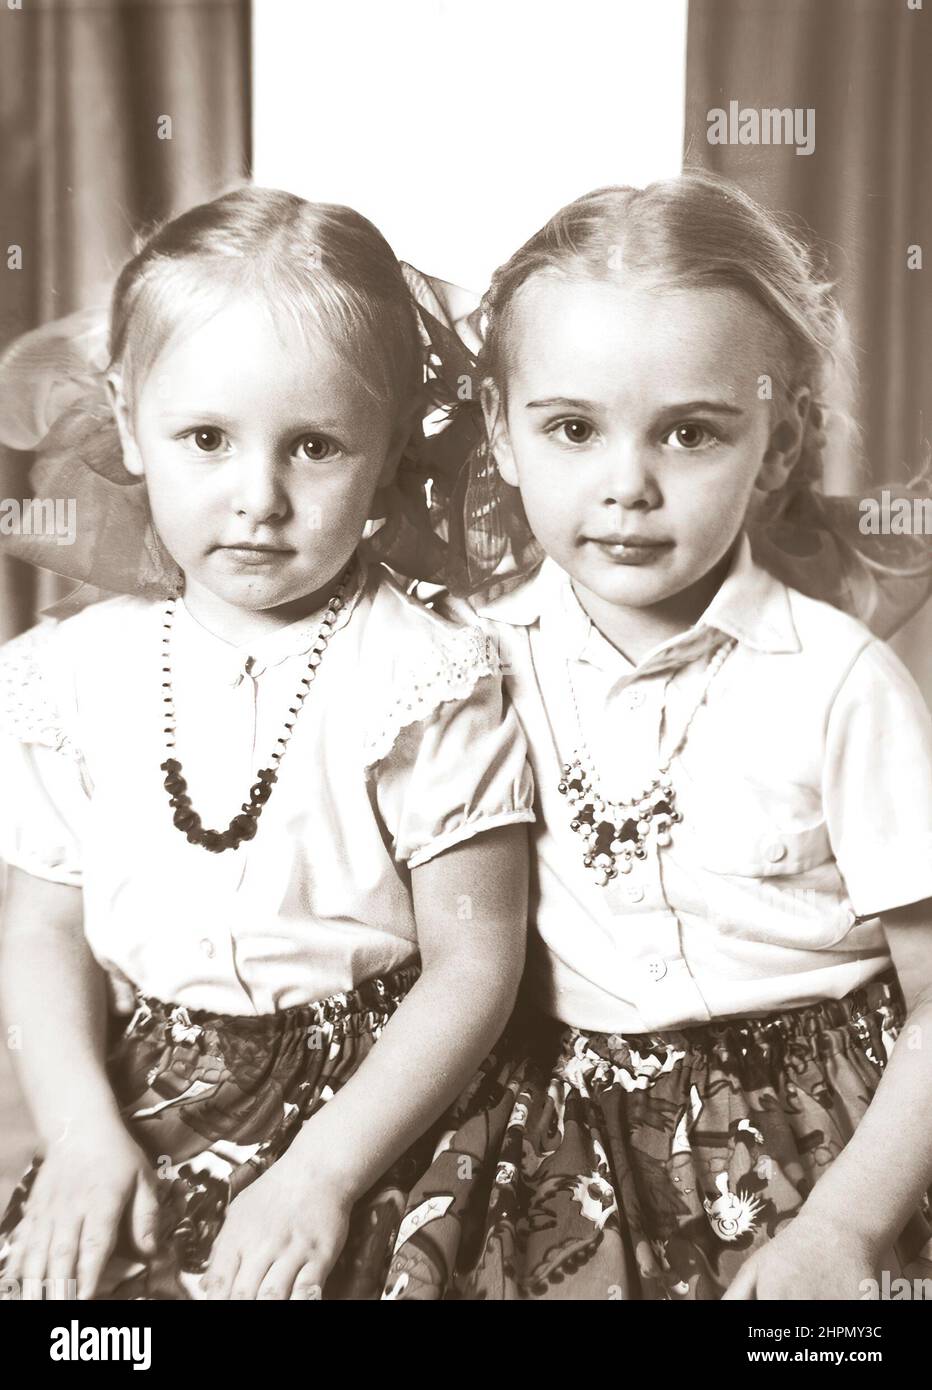 Russian President Vladimir Putin's daughters.  In 1985, before their departure for Germany, Vladimir and Lyudmila Putin welcomed their first daughter, Maria. Their second daughter, Katerina, was born in 1986, in Dresden.  Both girls were named in honour of their grandmothers, Maria Putina and Yekaterina Shkrebneva.  According to their mother, Lyudmila, Mr Putin loves his daughters very much. “Not all fathers are as loving with their children as he is. And he has always spoiled them, while I was the one who had to discipline them,” she says. Stock Photo